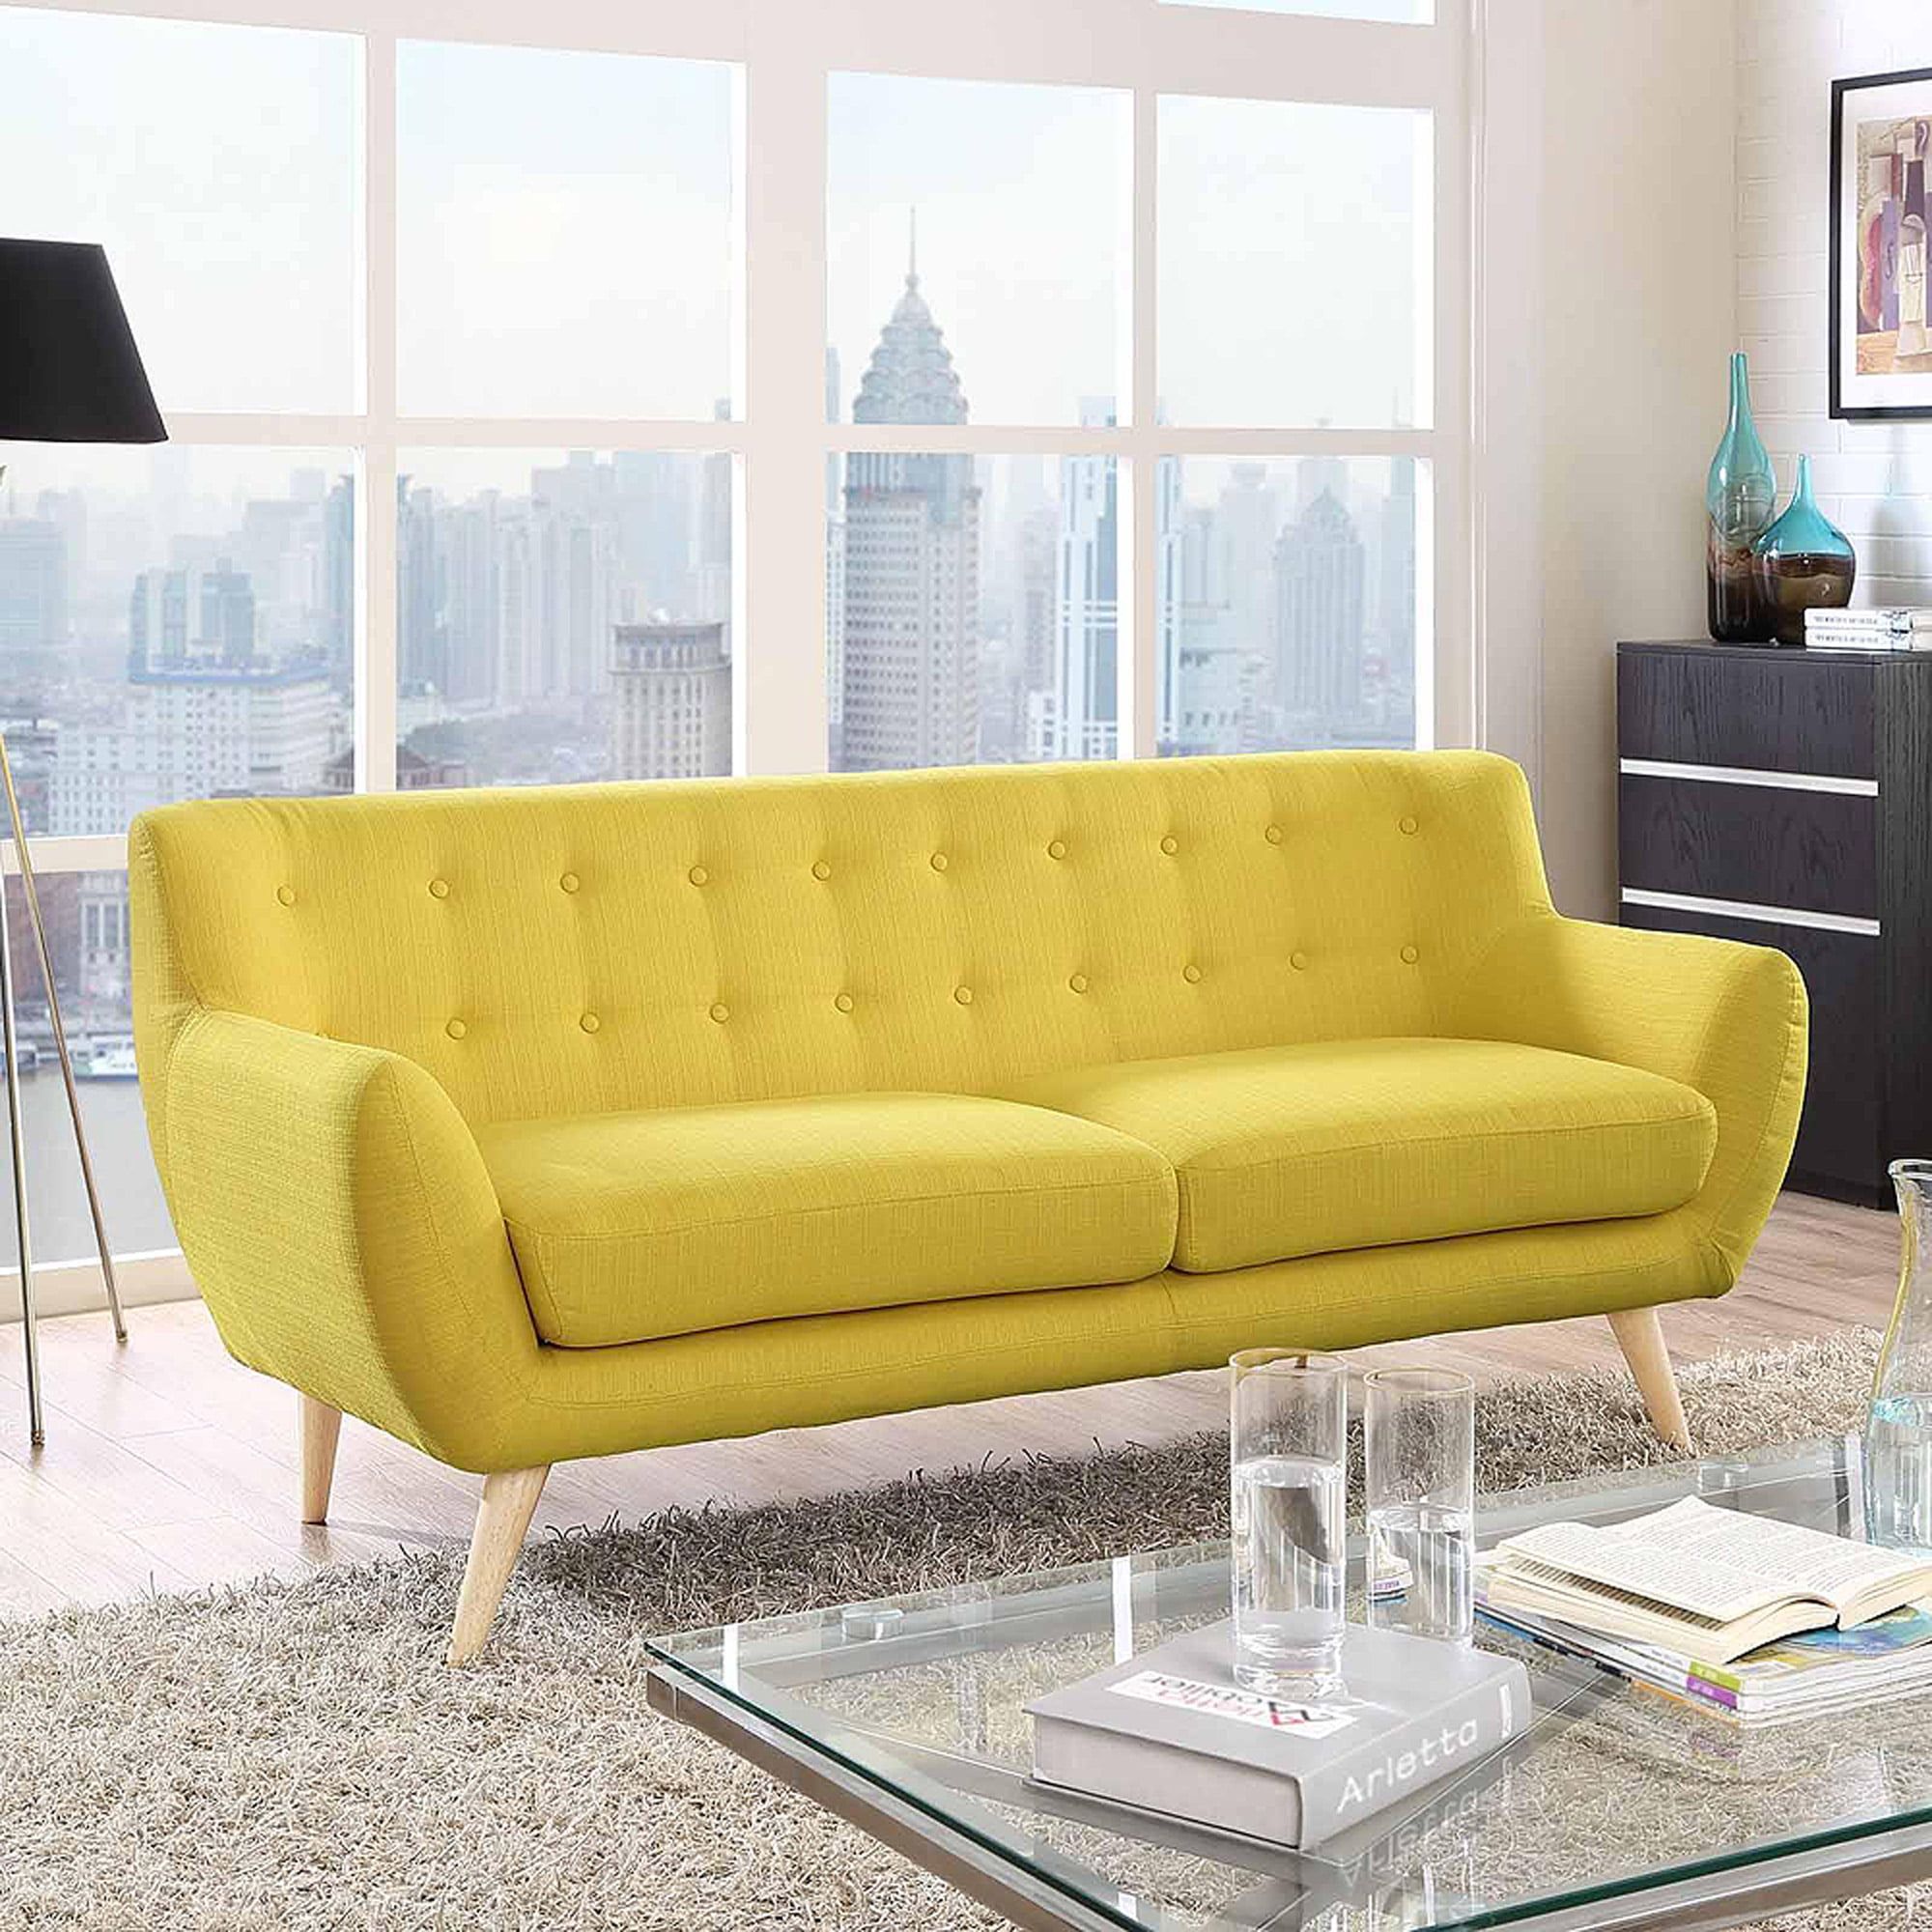 Modway Remark Modern Upholstered Sofa, Multiple Colors – Walmart In Sofas In Multiple Colors (View 18 of 20)